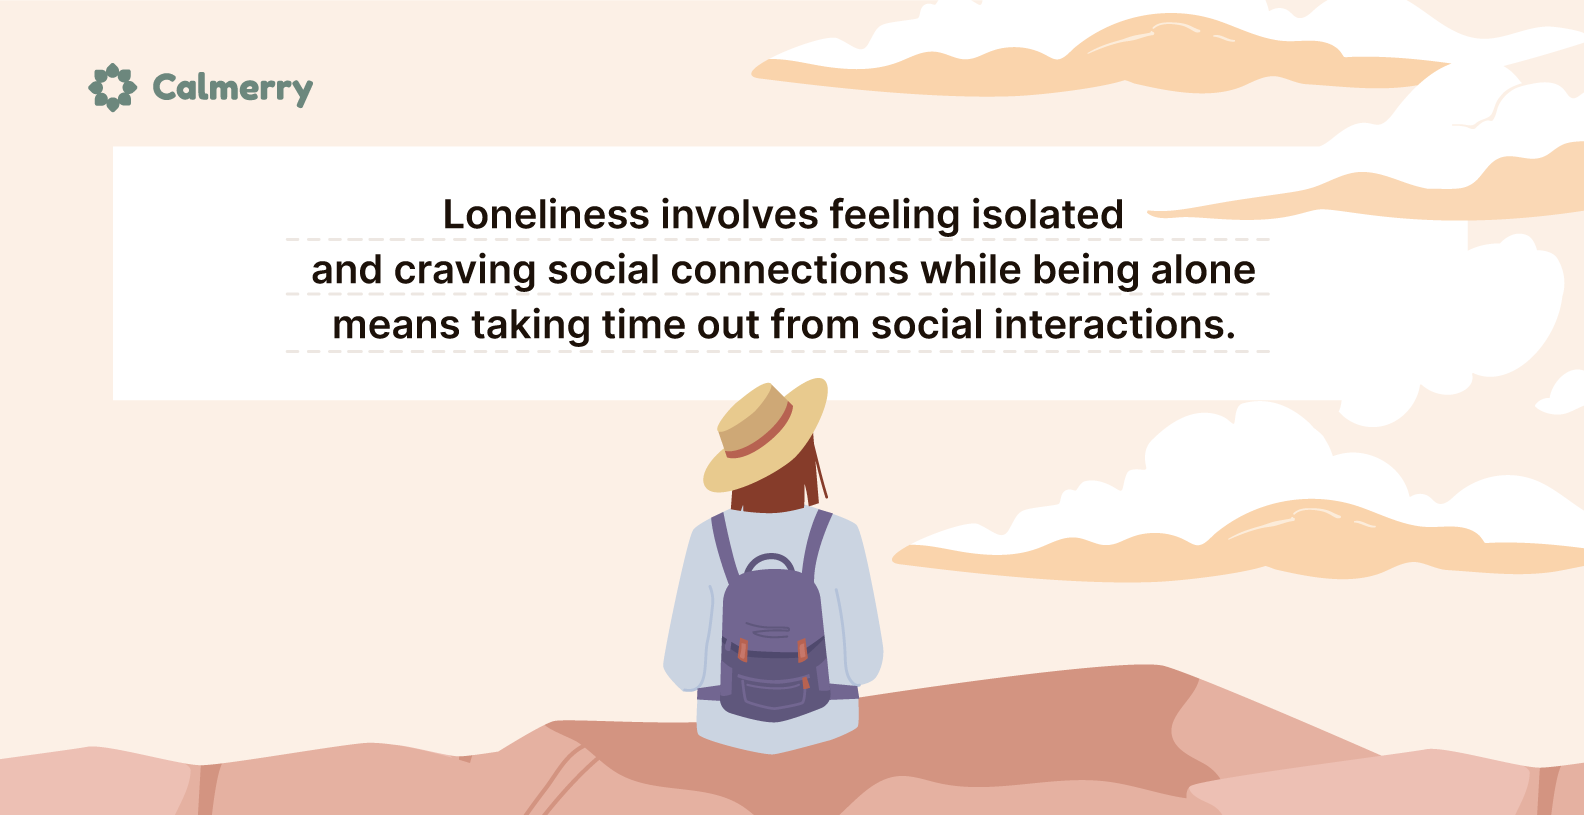 being alone means taking time out from social interactions.